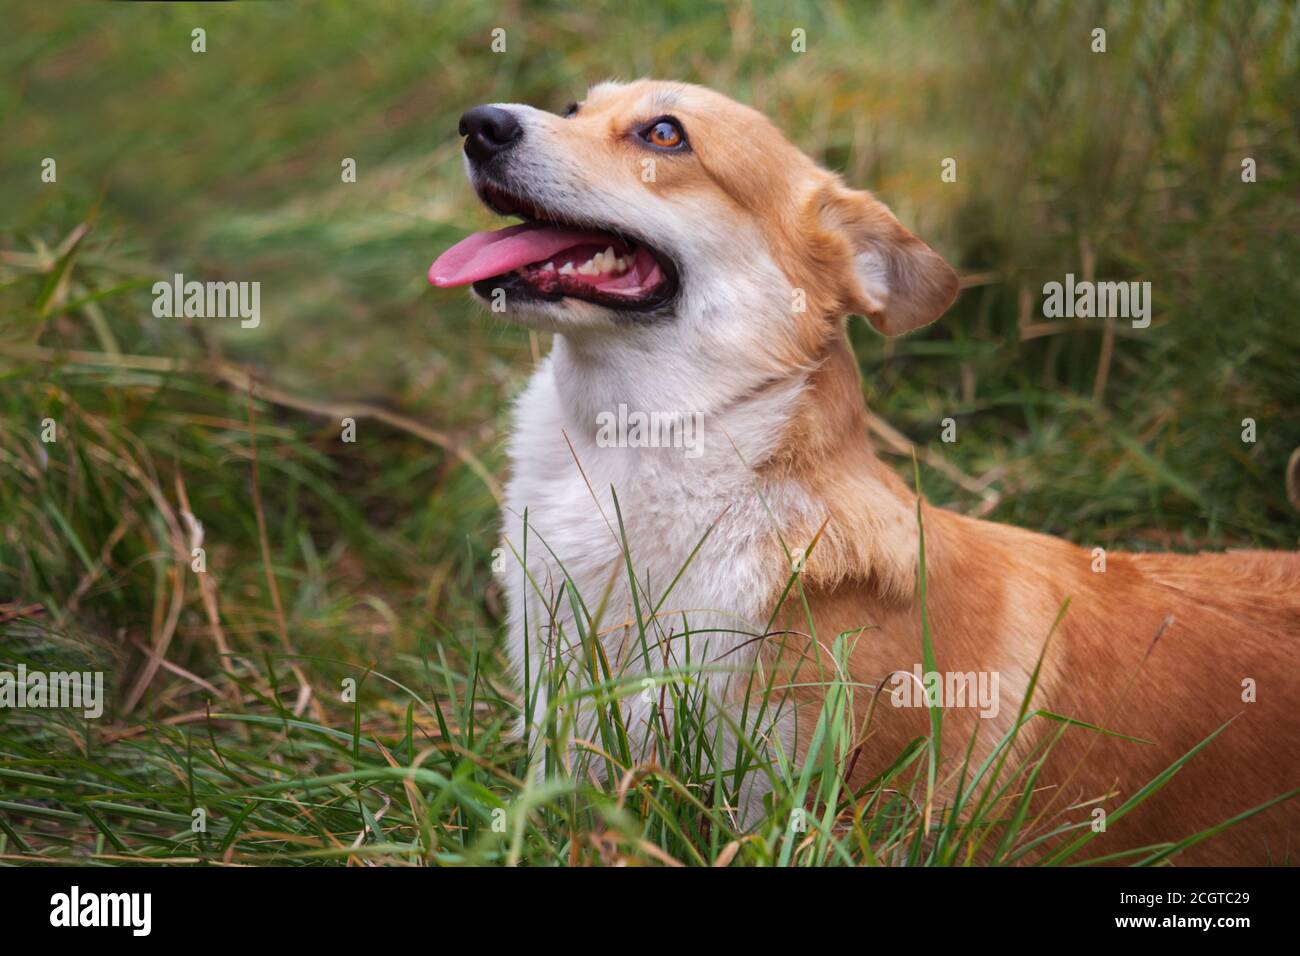 reddish-white welsh corgi stands in the green grass and looks up. Dog stuck out its tongue Stock Photo